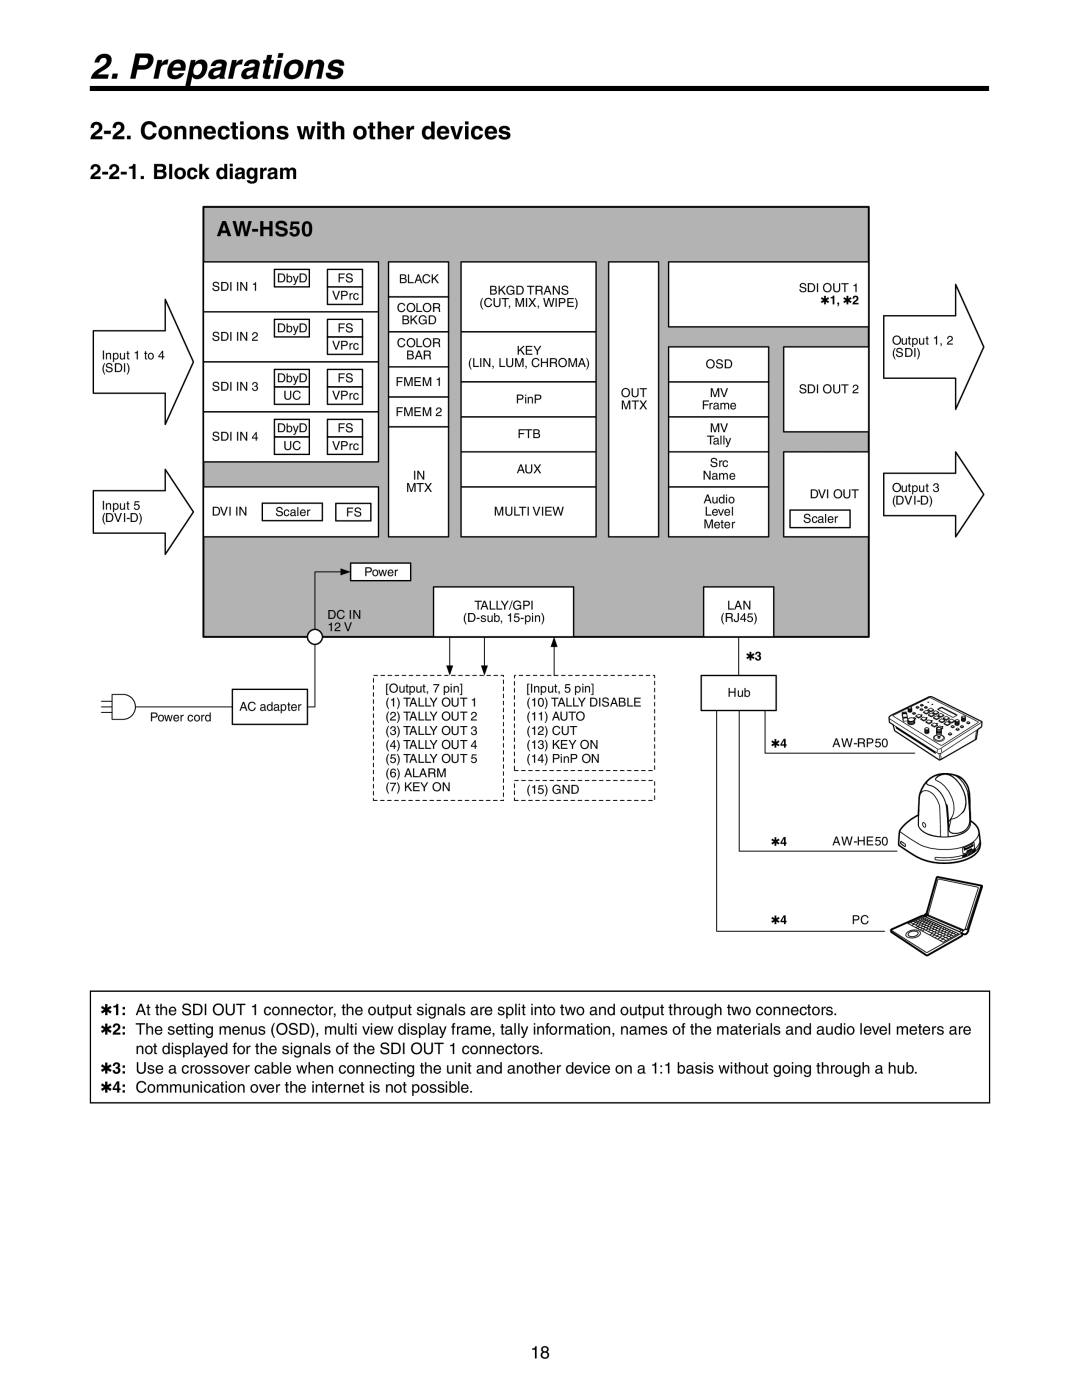 Panasonic AW-HS50N operating instructions Connections with other devices, Block diagram, Preparations 